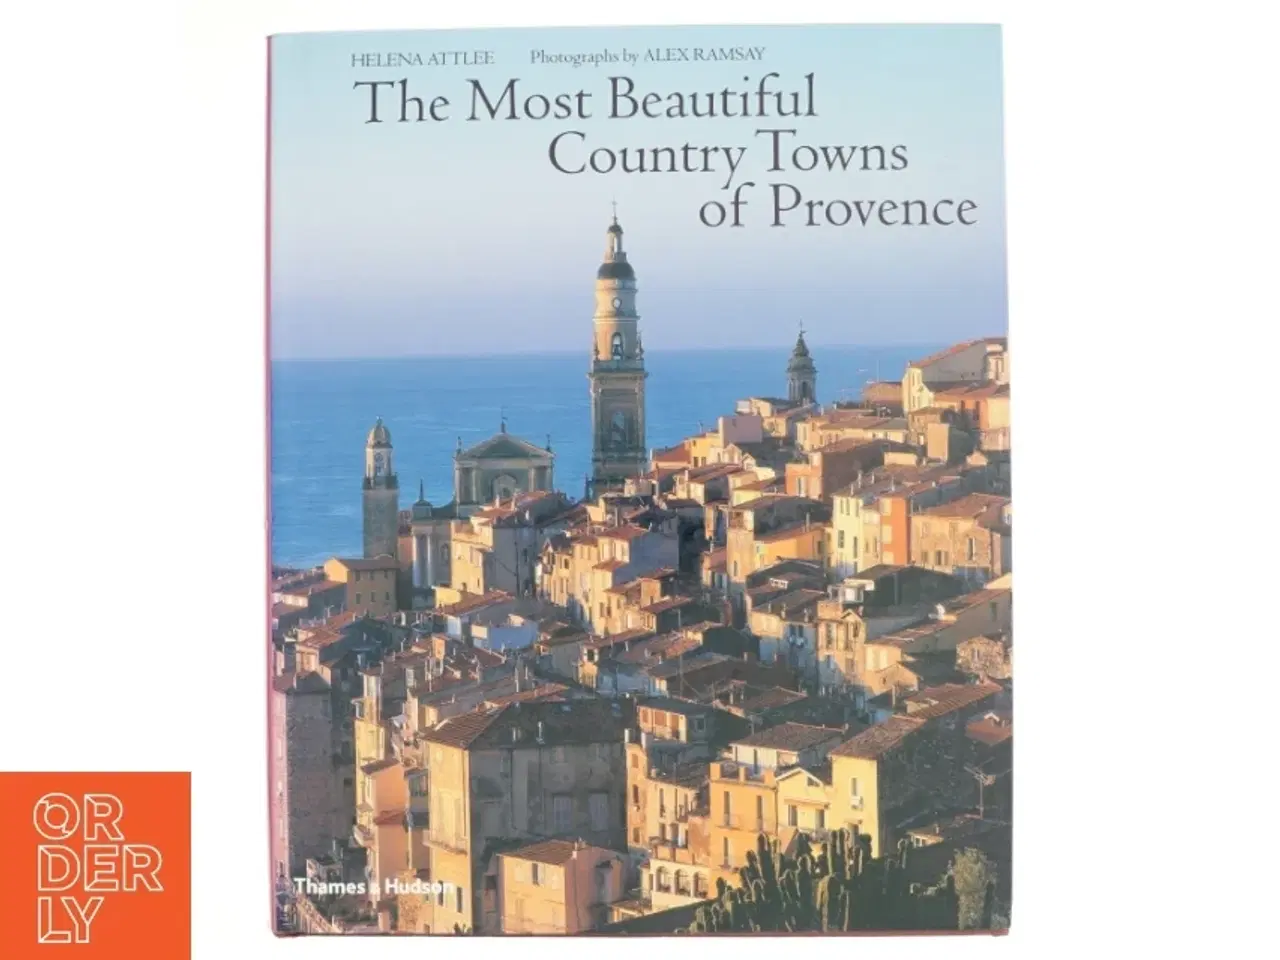 Billede 1 - The Most Beautiful Country Towns of Provence af Helena Attlee, Alex Ramsay (Bog)